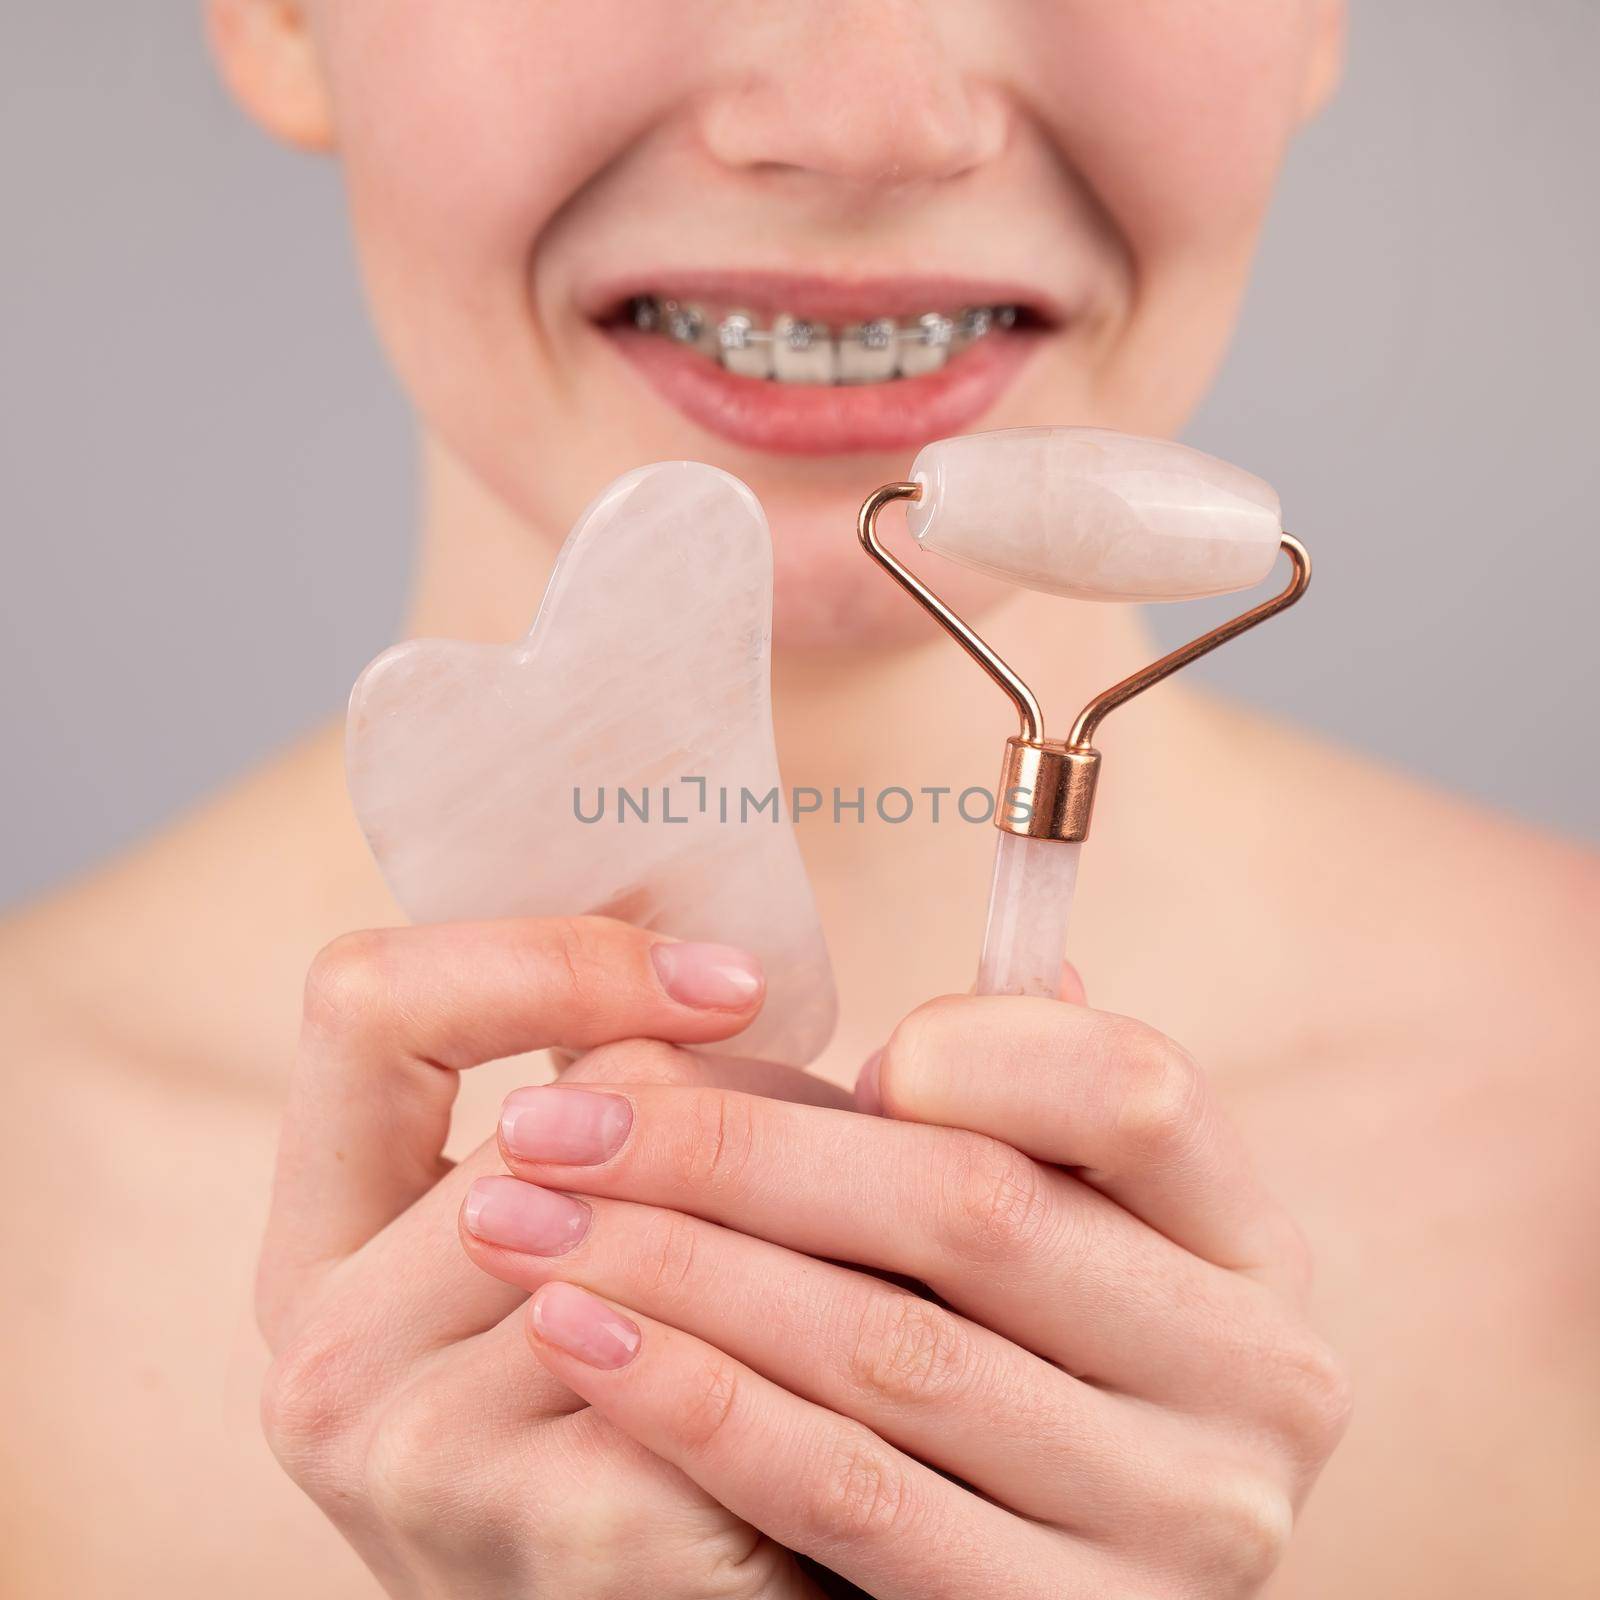 Close-up portrait of a woman with braces on her teeth holding a pink roller massager and a gouache scraper on a white background. by mrwed54